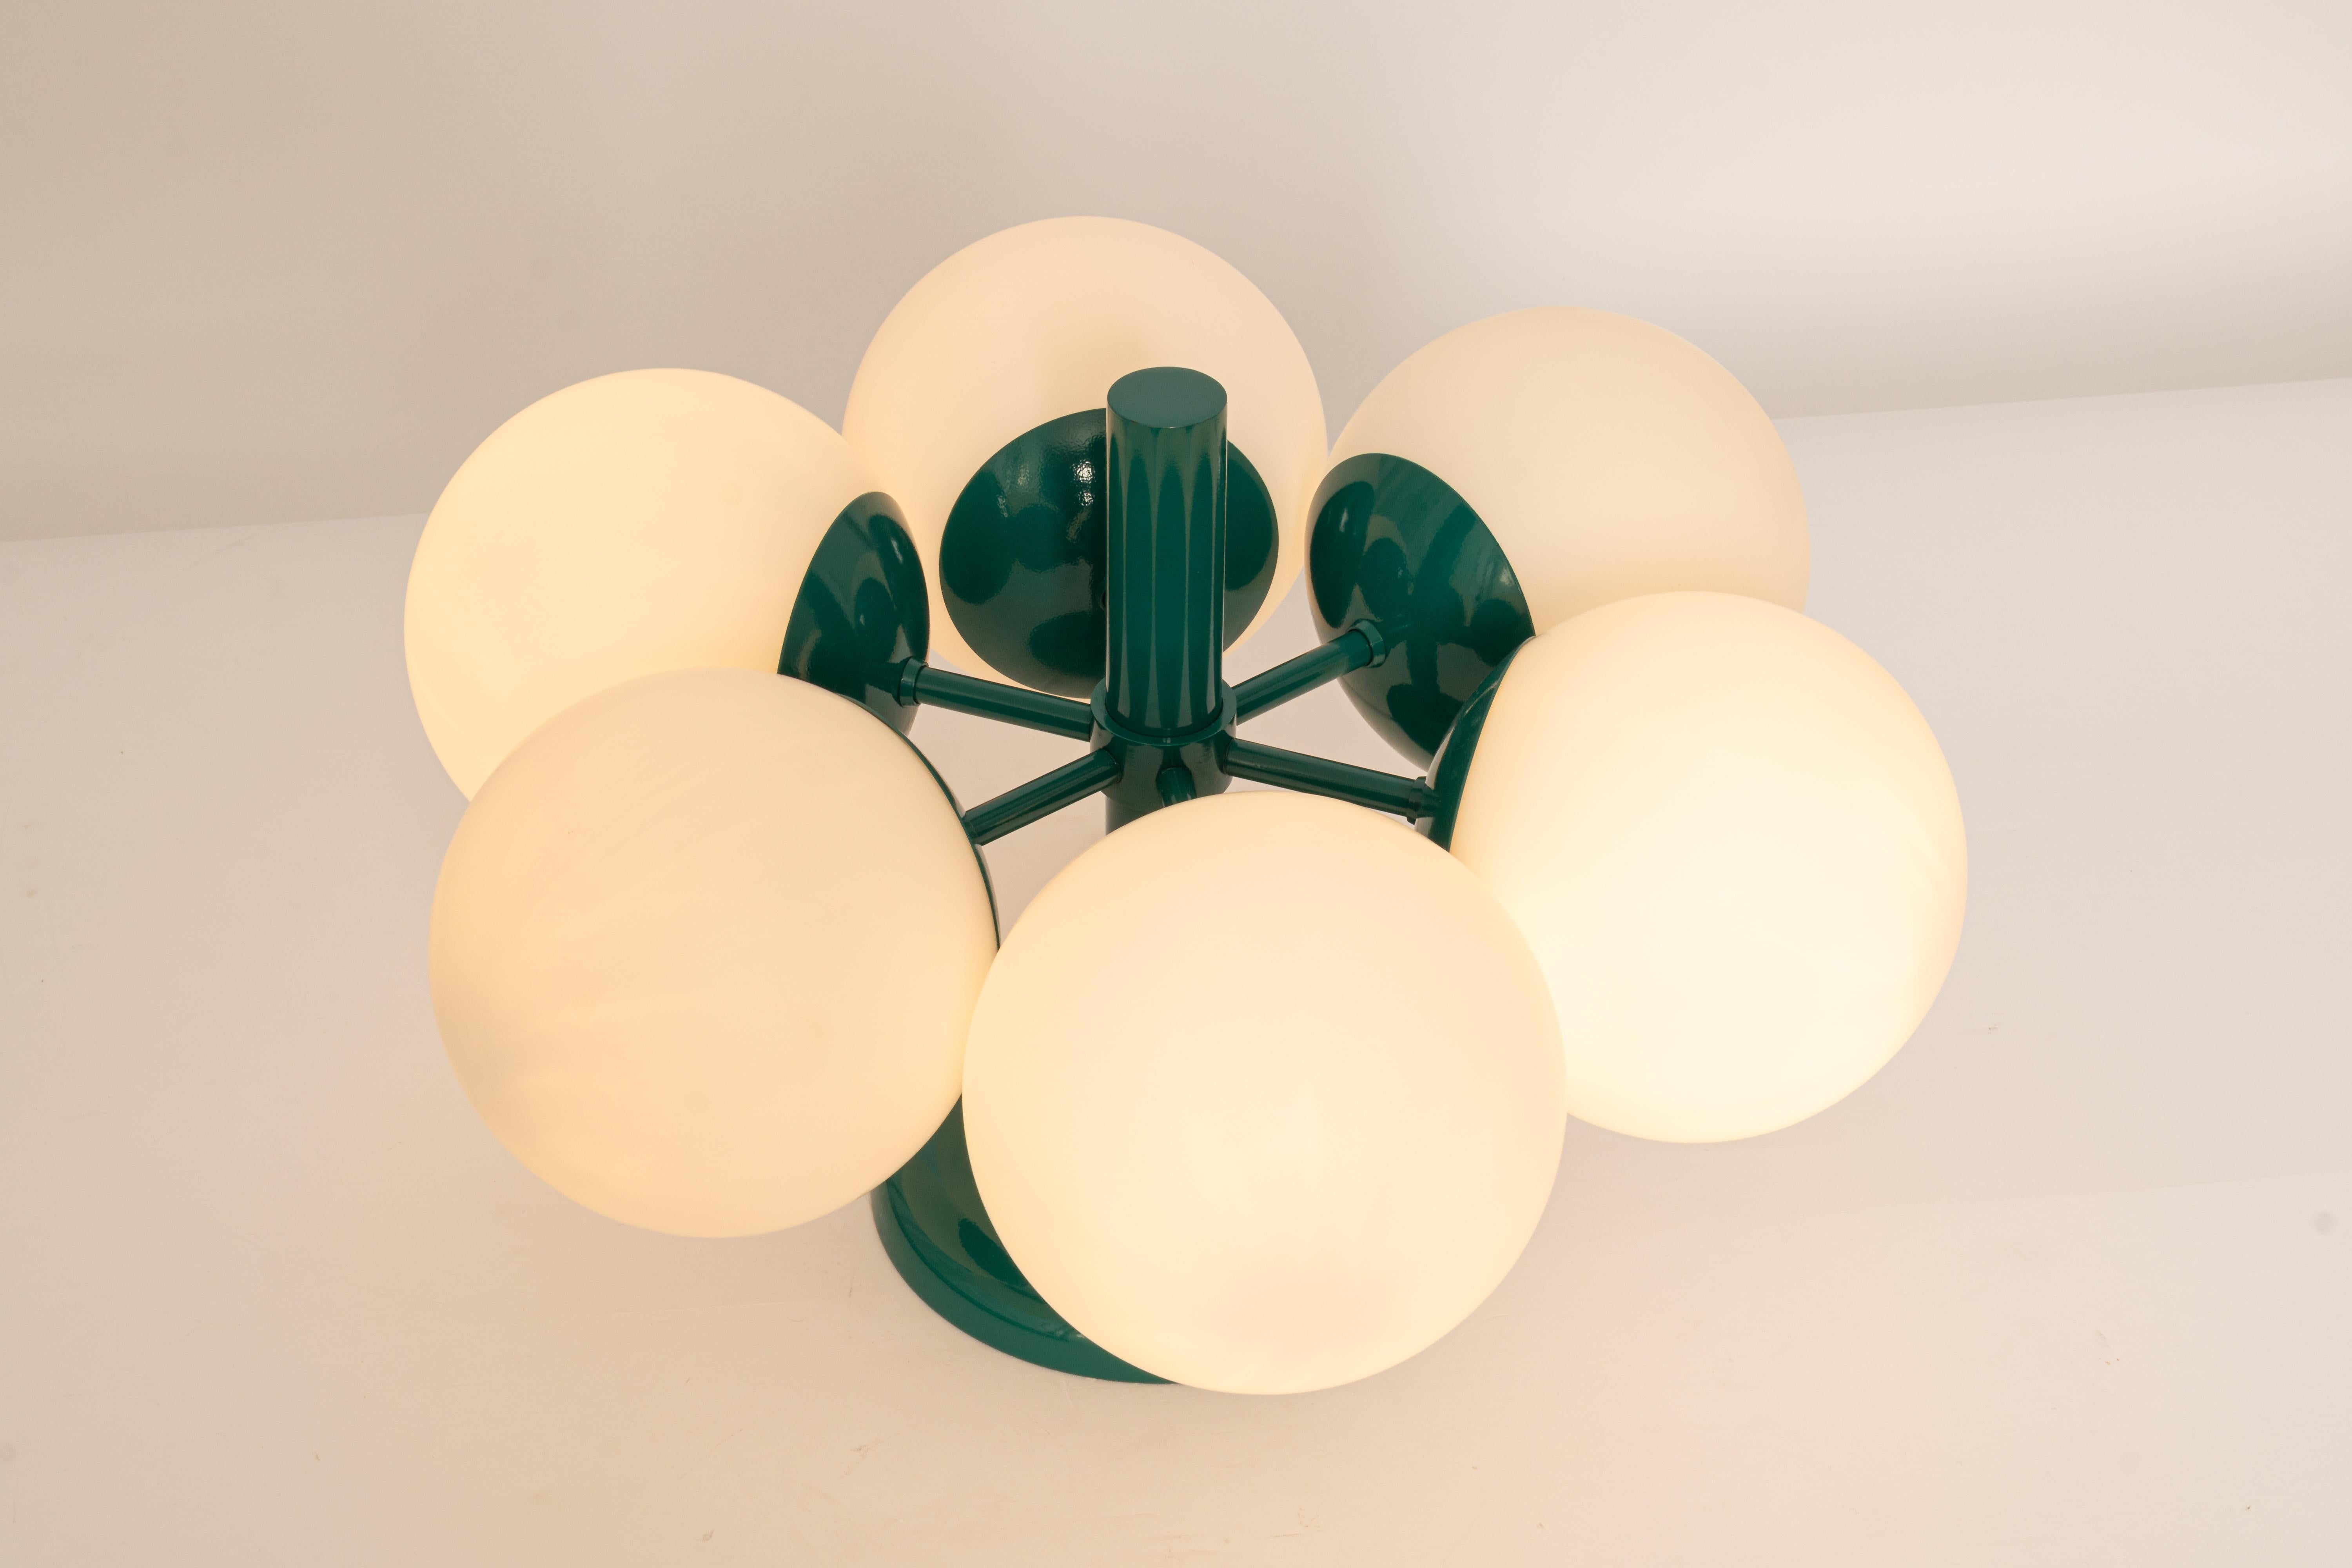 Midcentury Orbital Ceiling /Wall Lamp in Green by Kaiser, Germany, 1970s For Sale 5